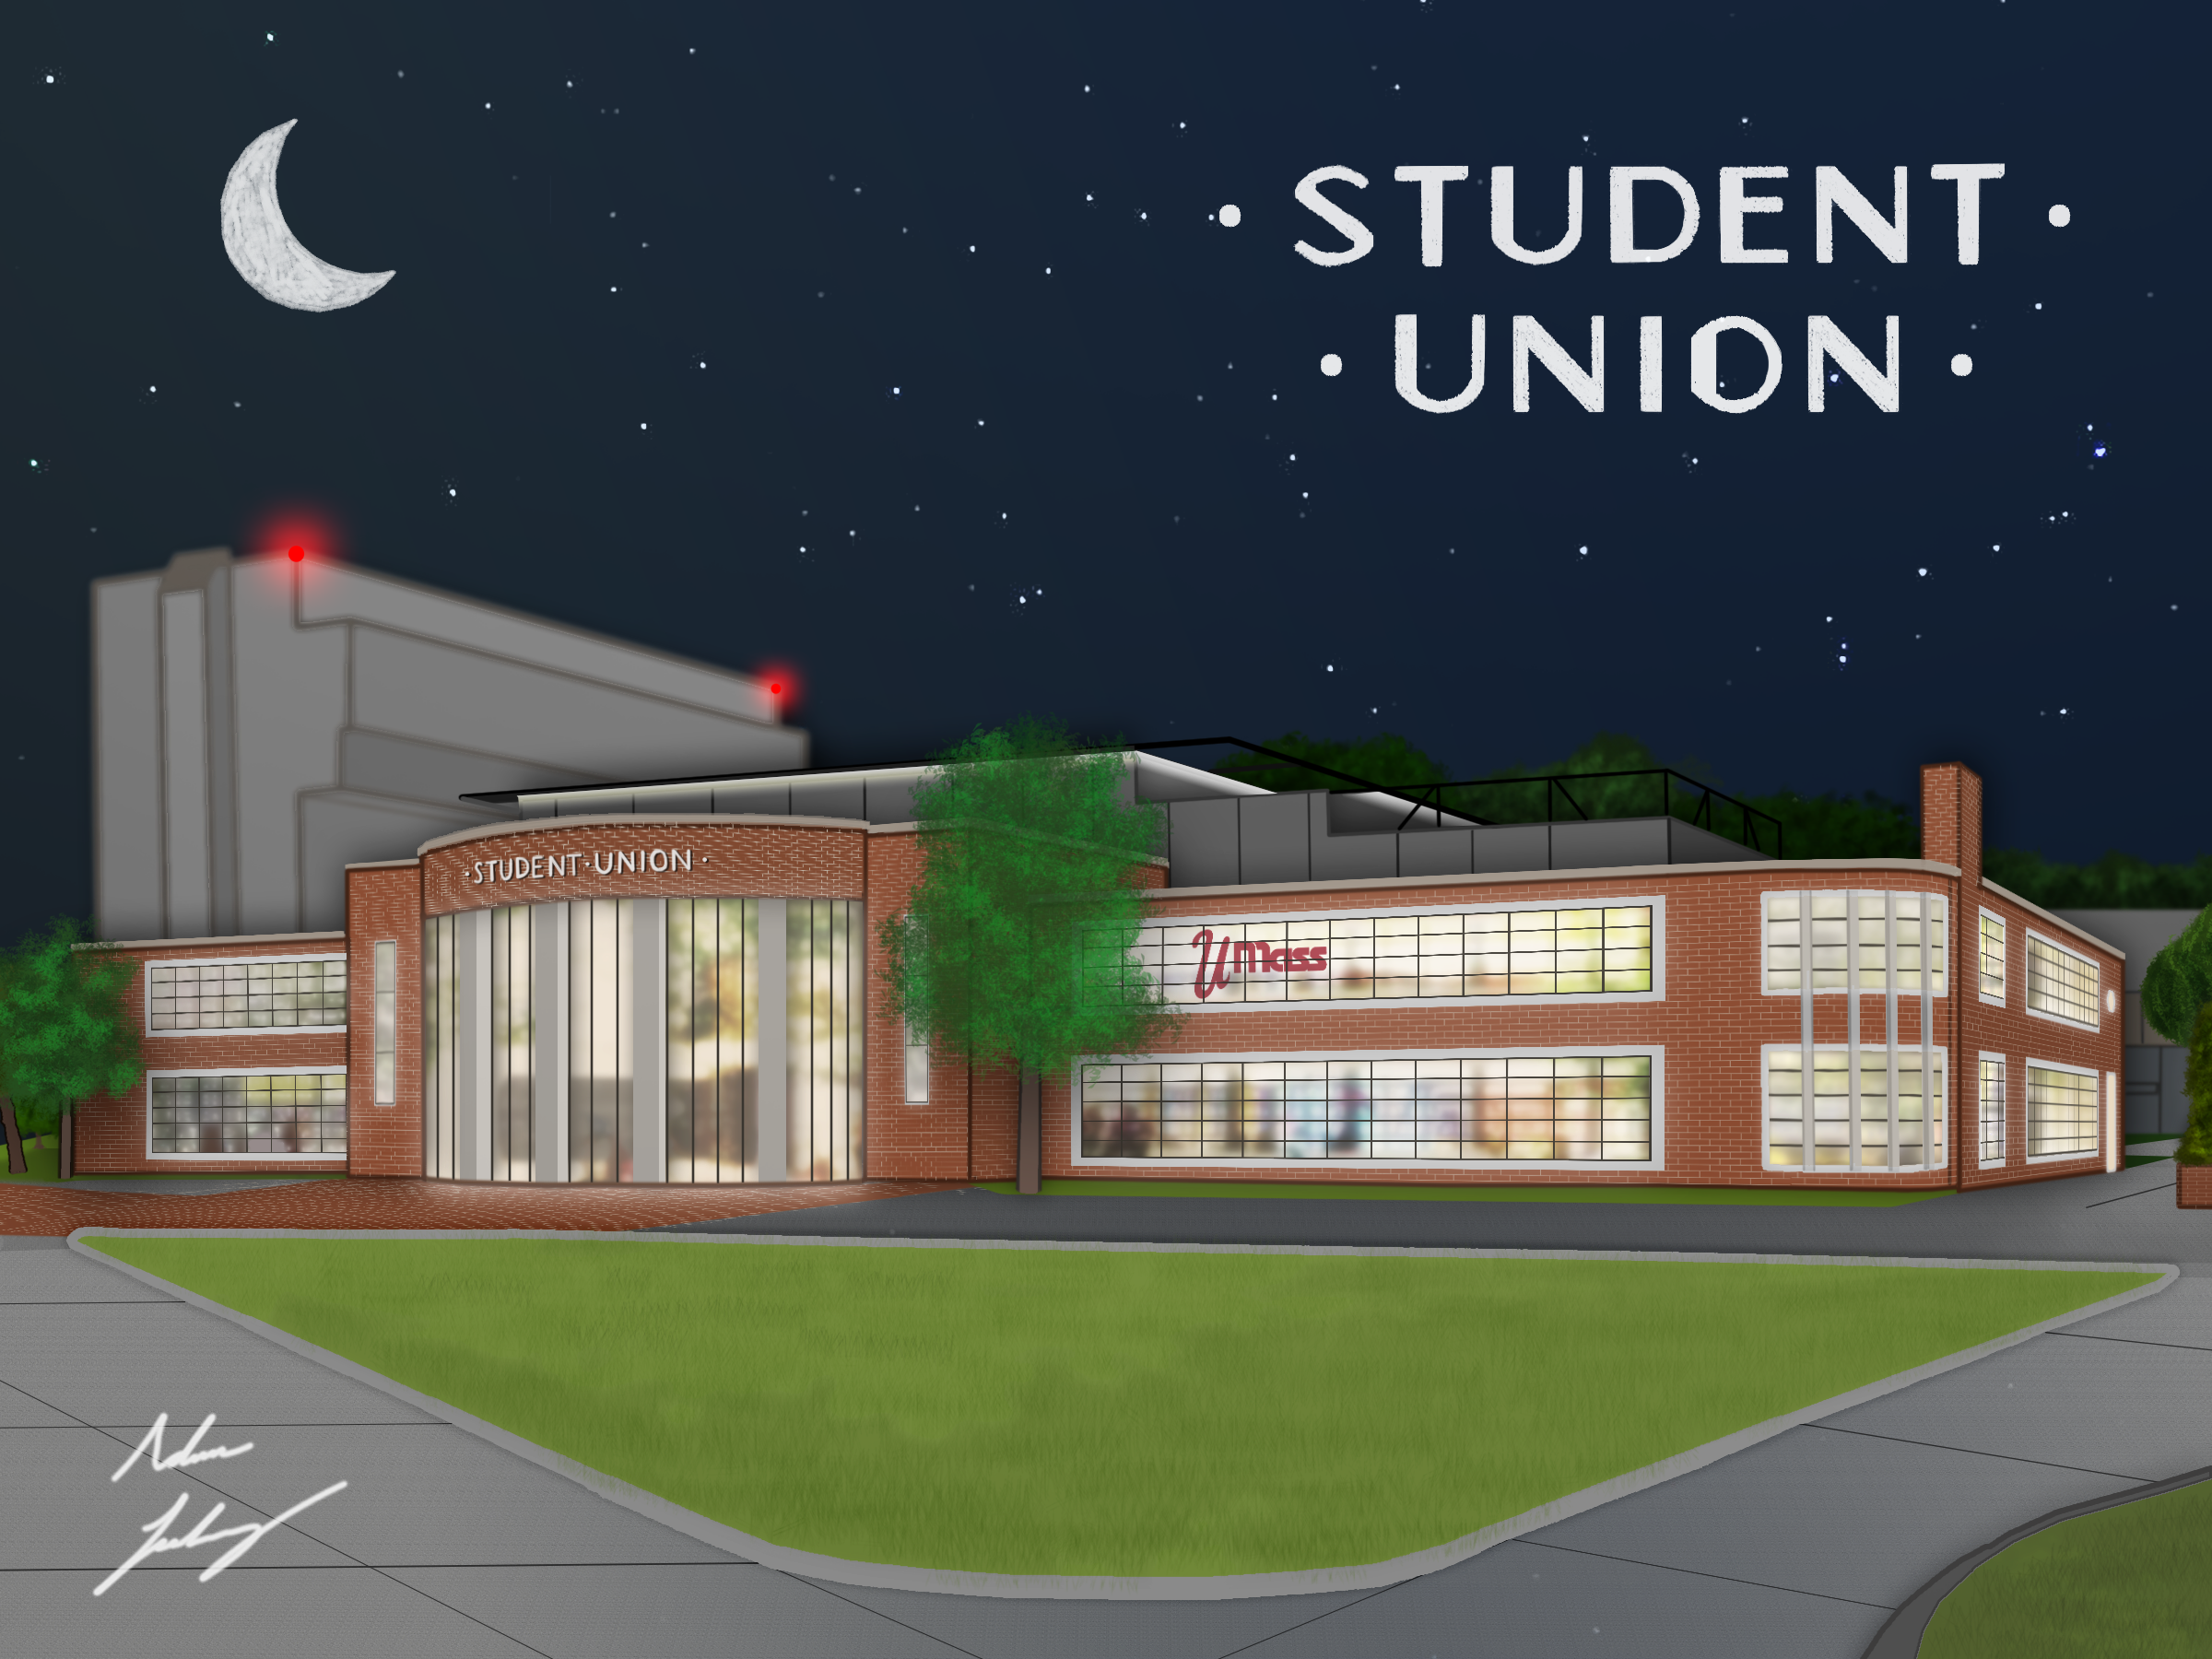 A drawing of the Student Union at UMass